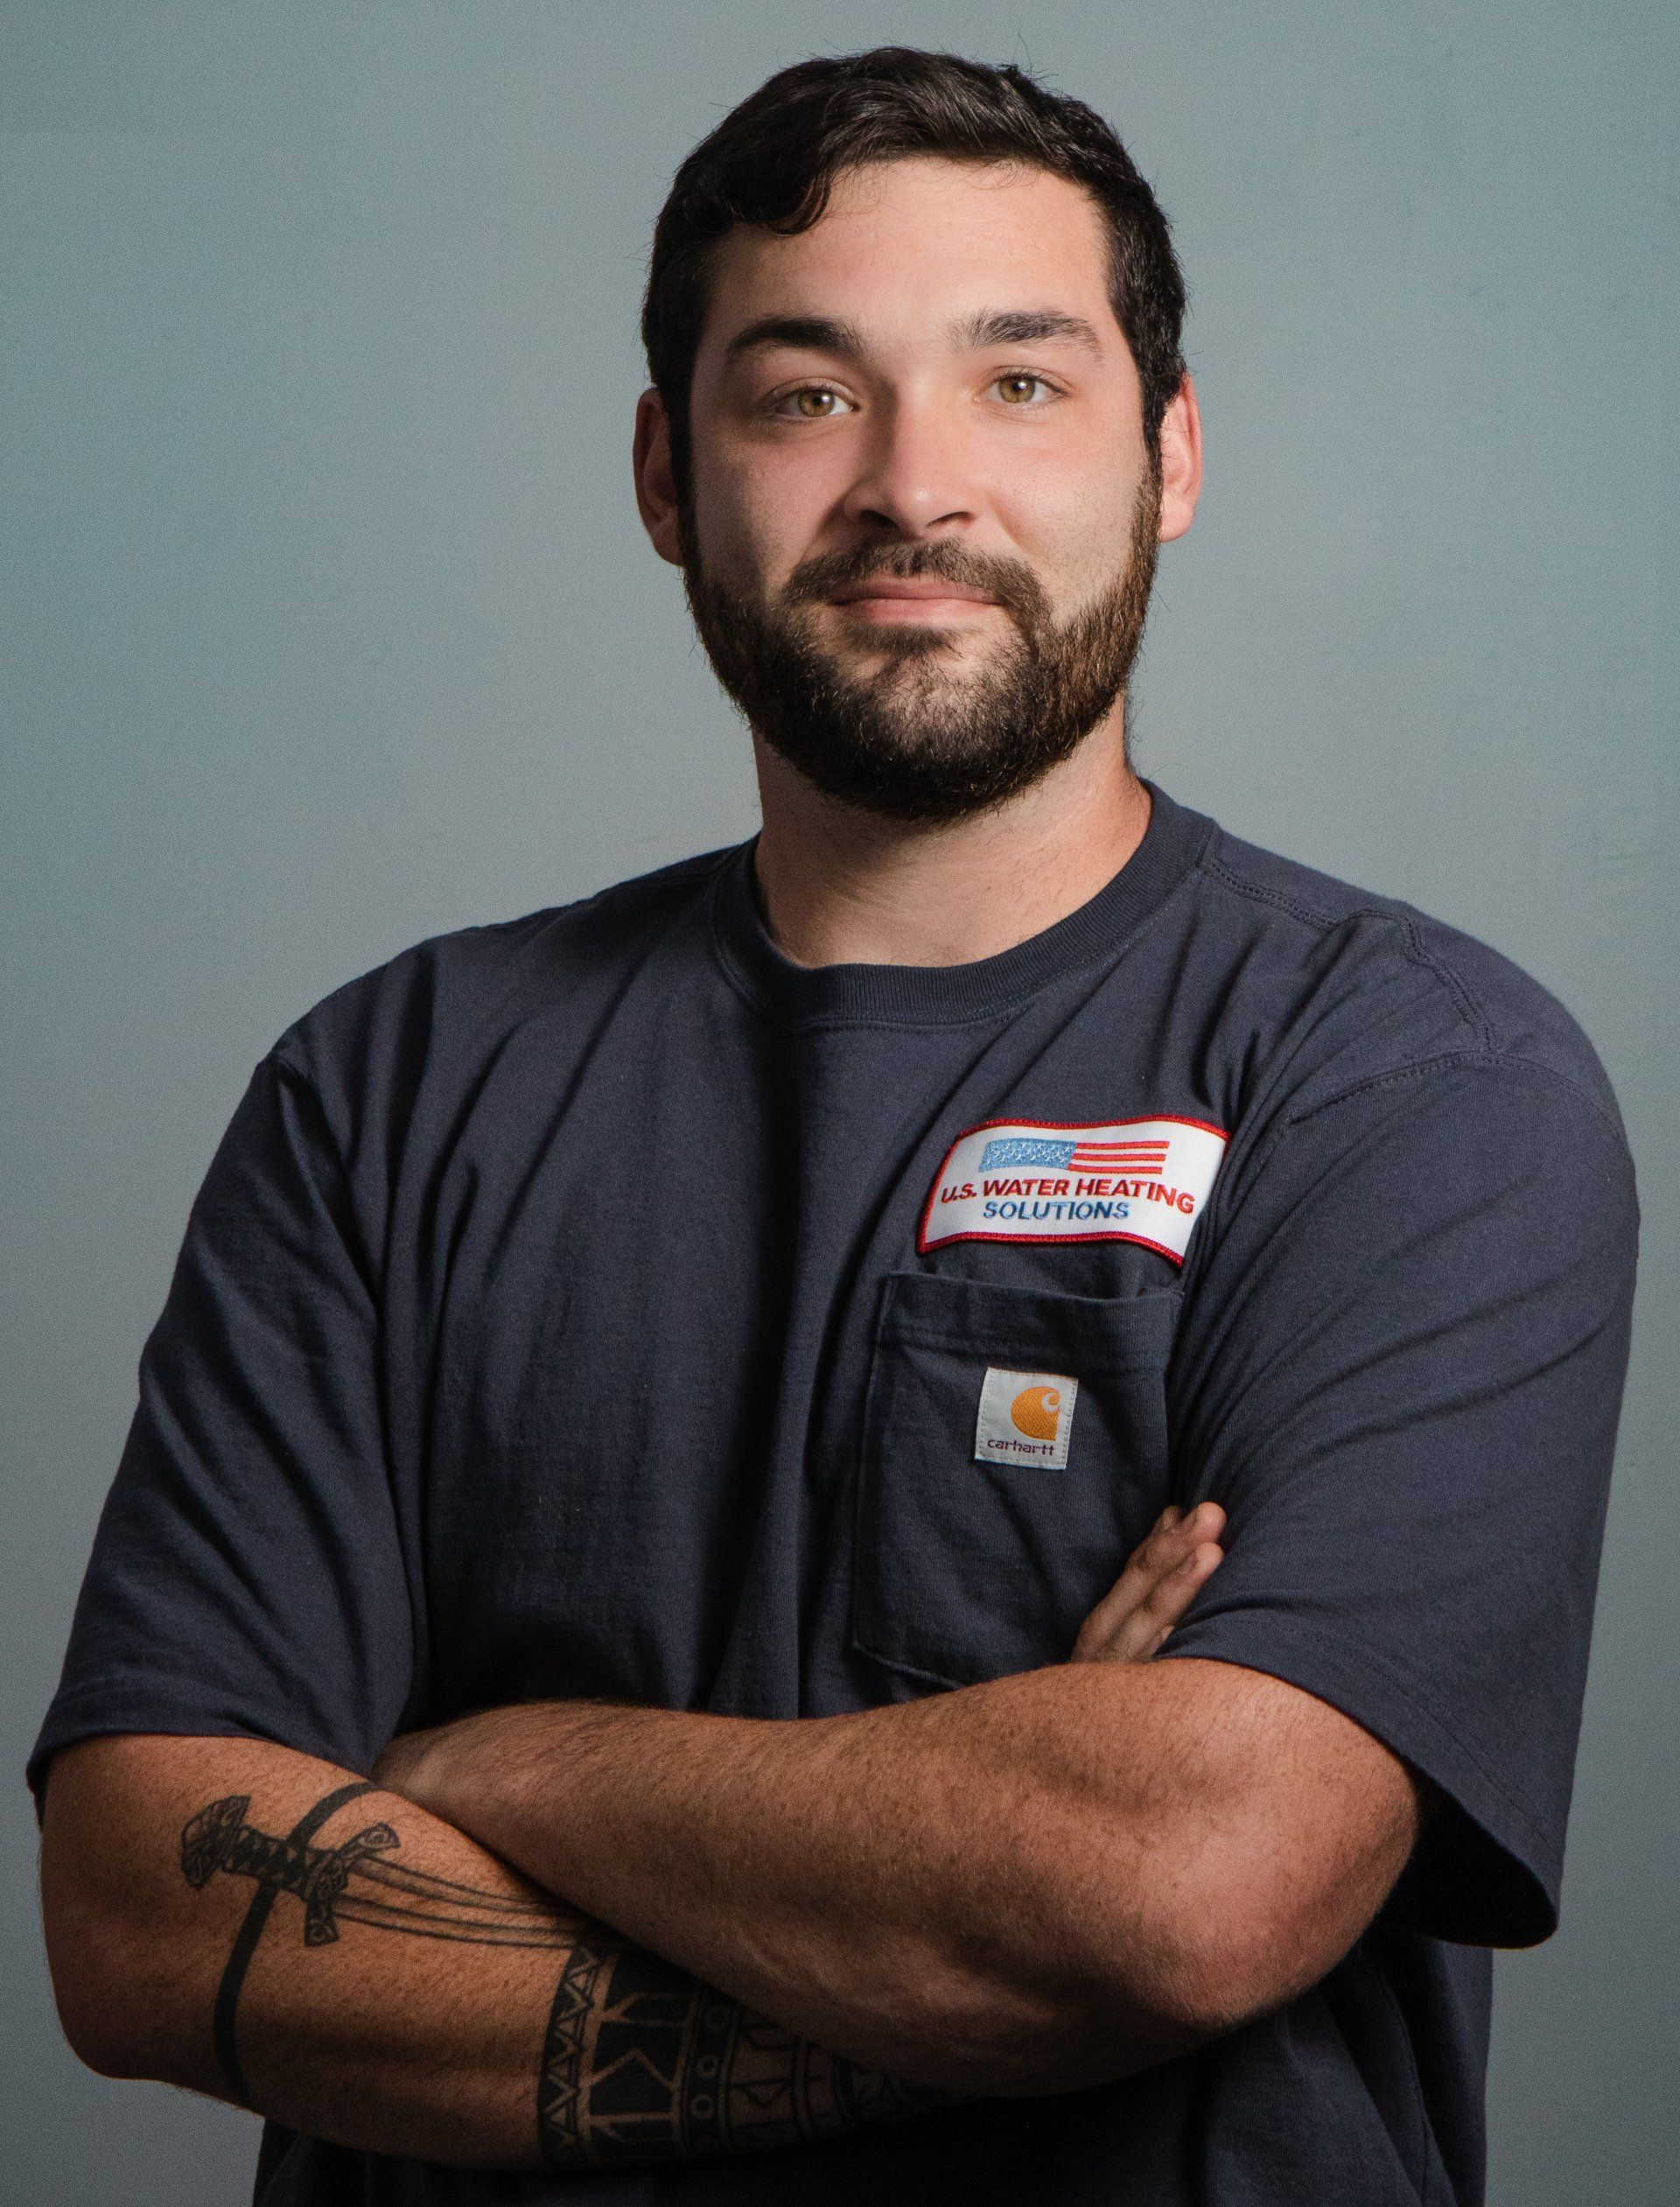 Water heater service technician poses for headshot